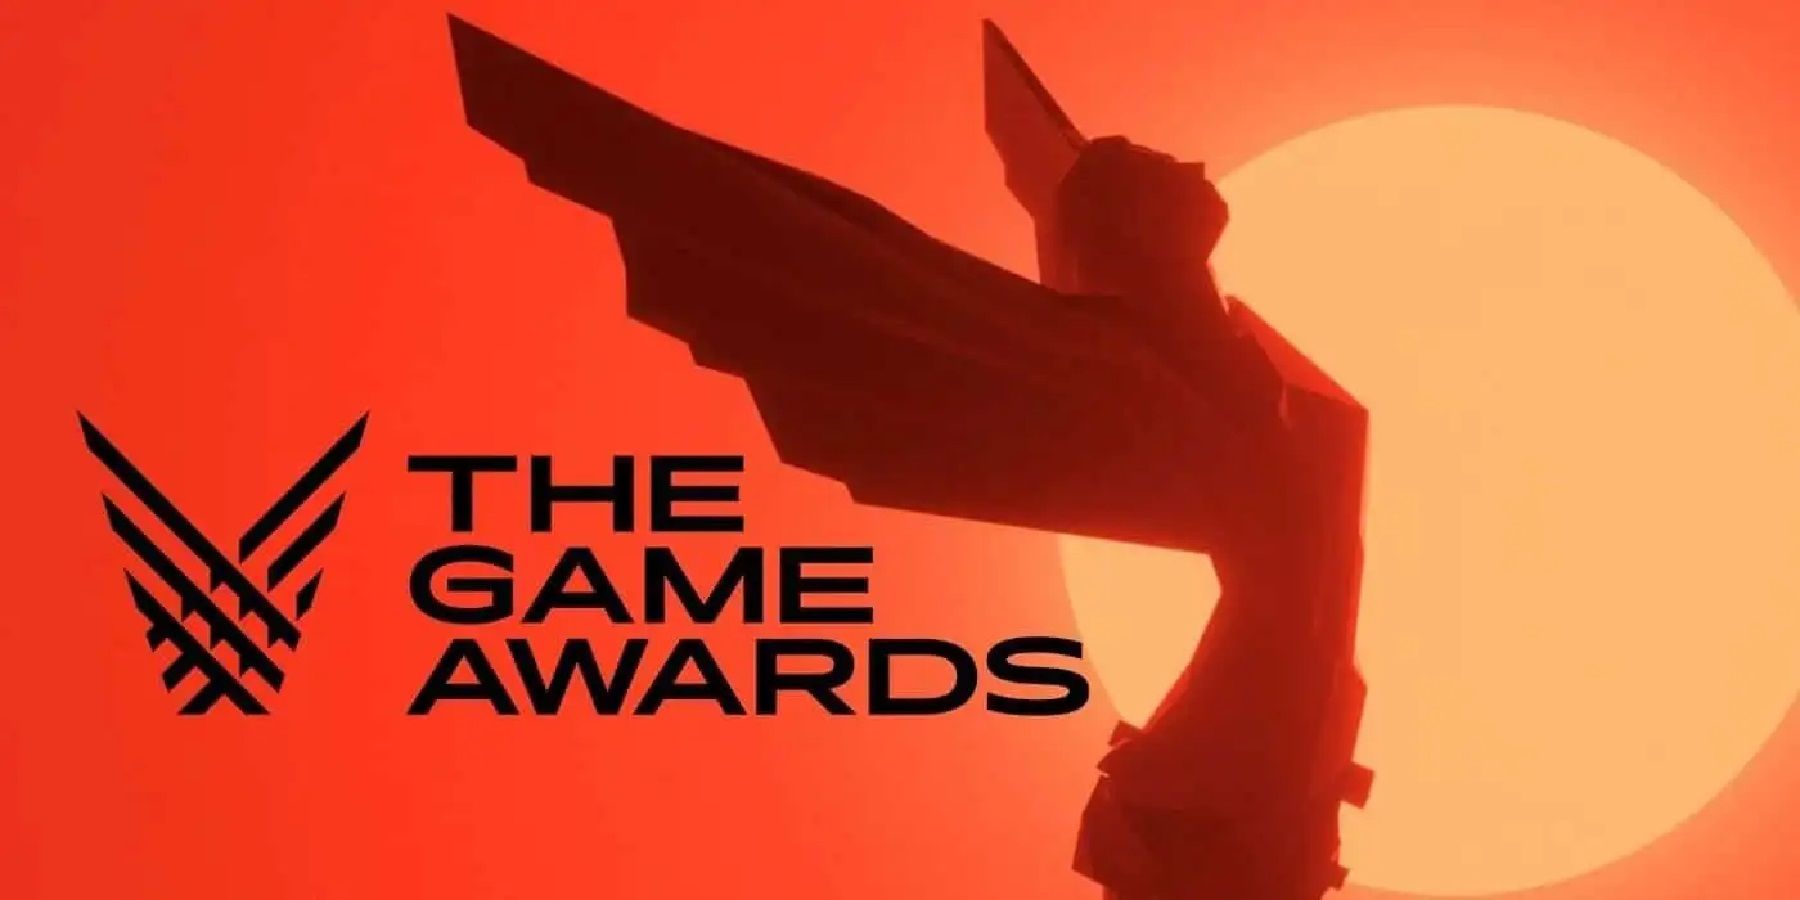 The Game Awards 2022 Predictions - Results, Winners, Reveals